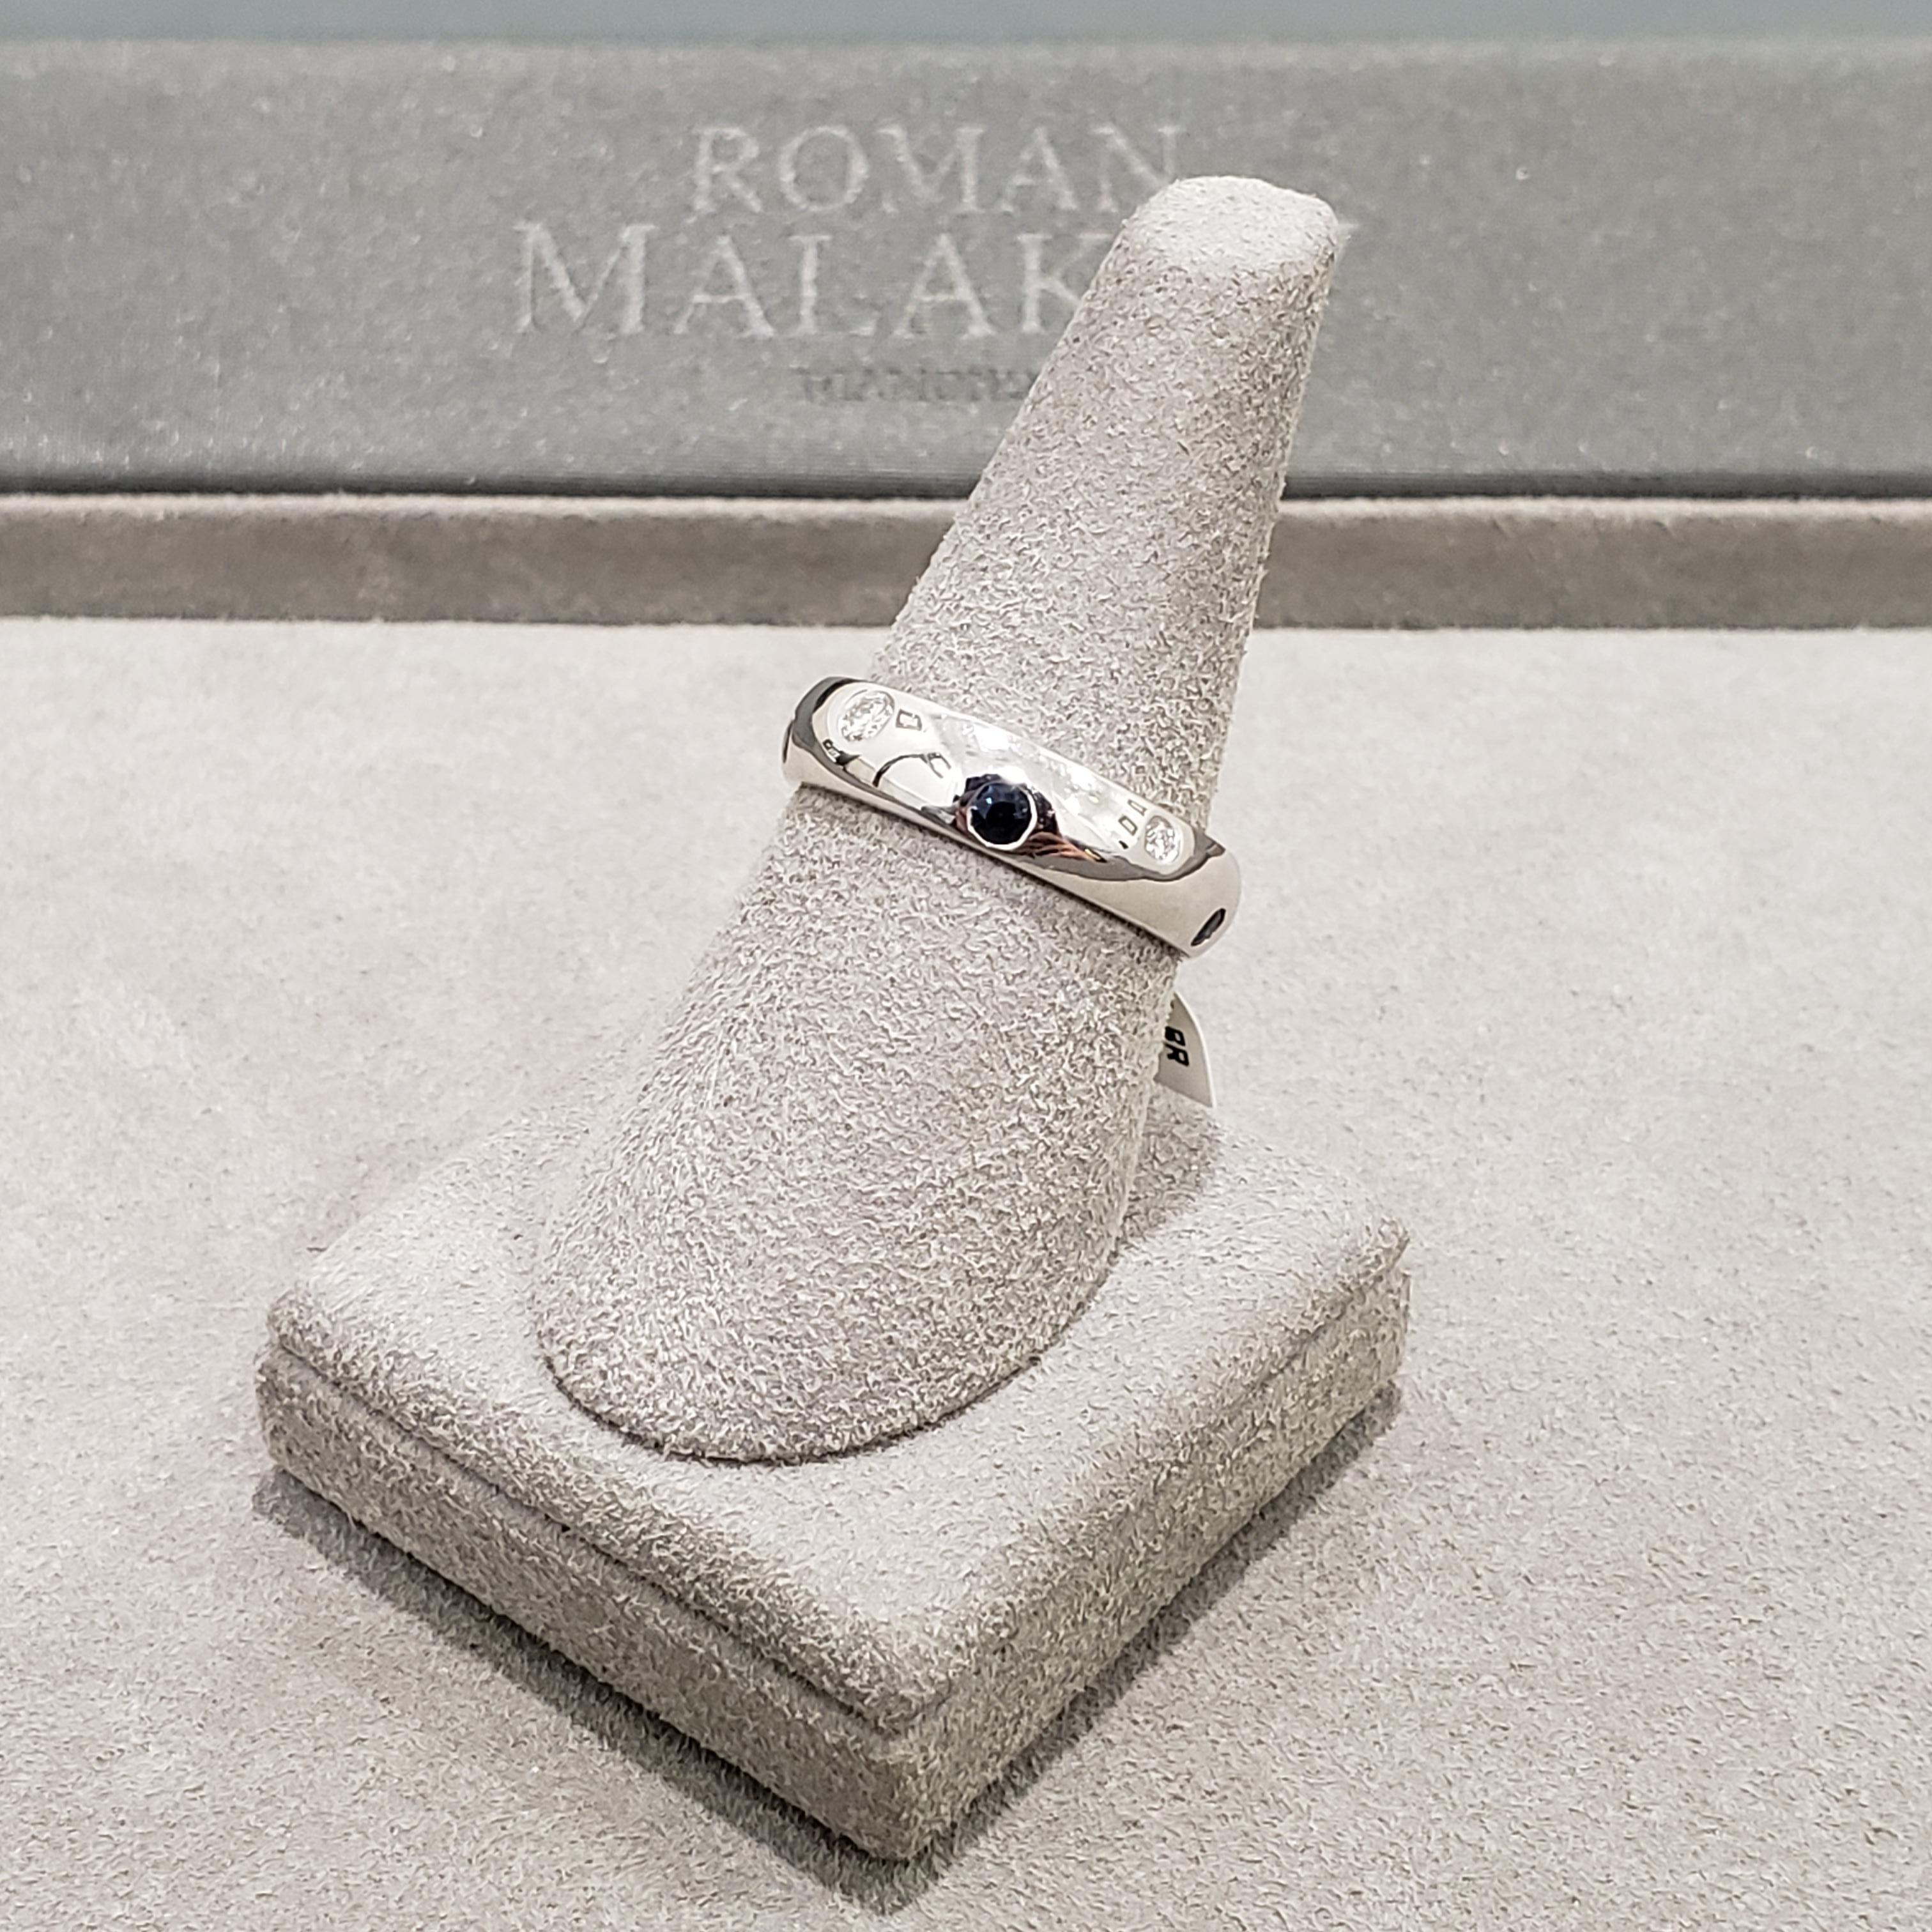 Showcasing a mix of round diamonds and blue sapphires, set flushed in a staggered and rounded Etoile design. Diamonds weigh 0.21 carats total; sapphires weigh 0.23 carats total. Made in 18 karat white gold. Size 6.75 US.

Roman Malakov is a custom